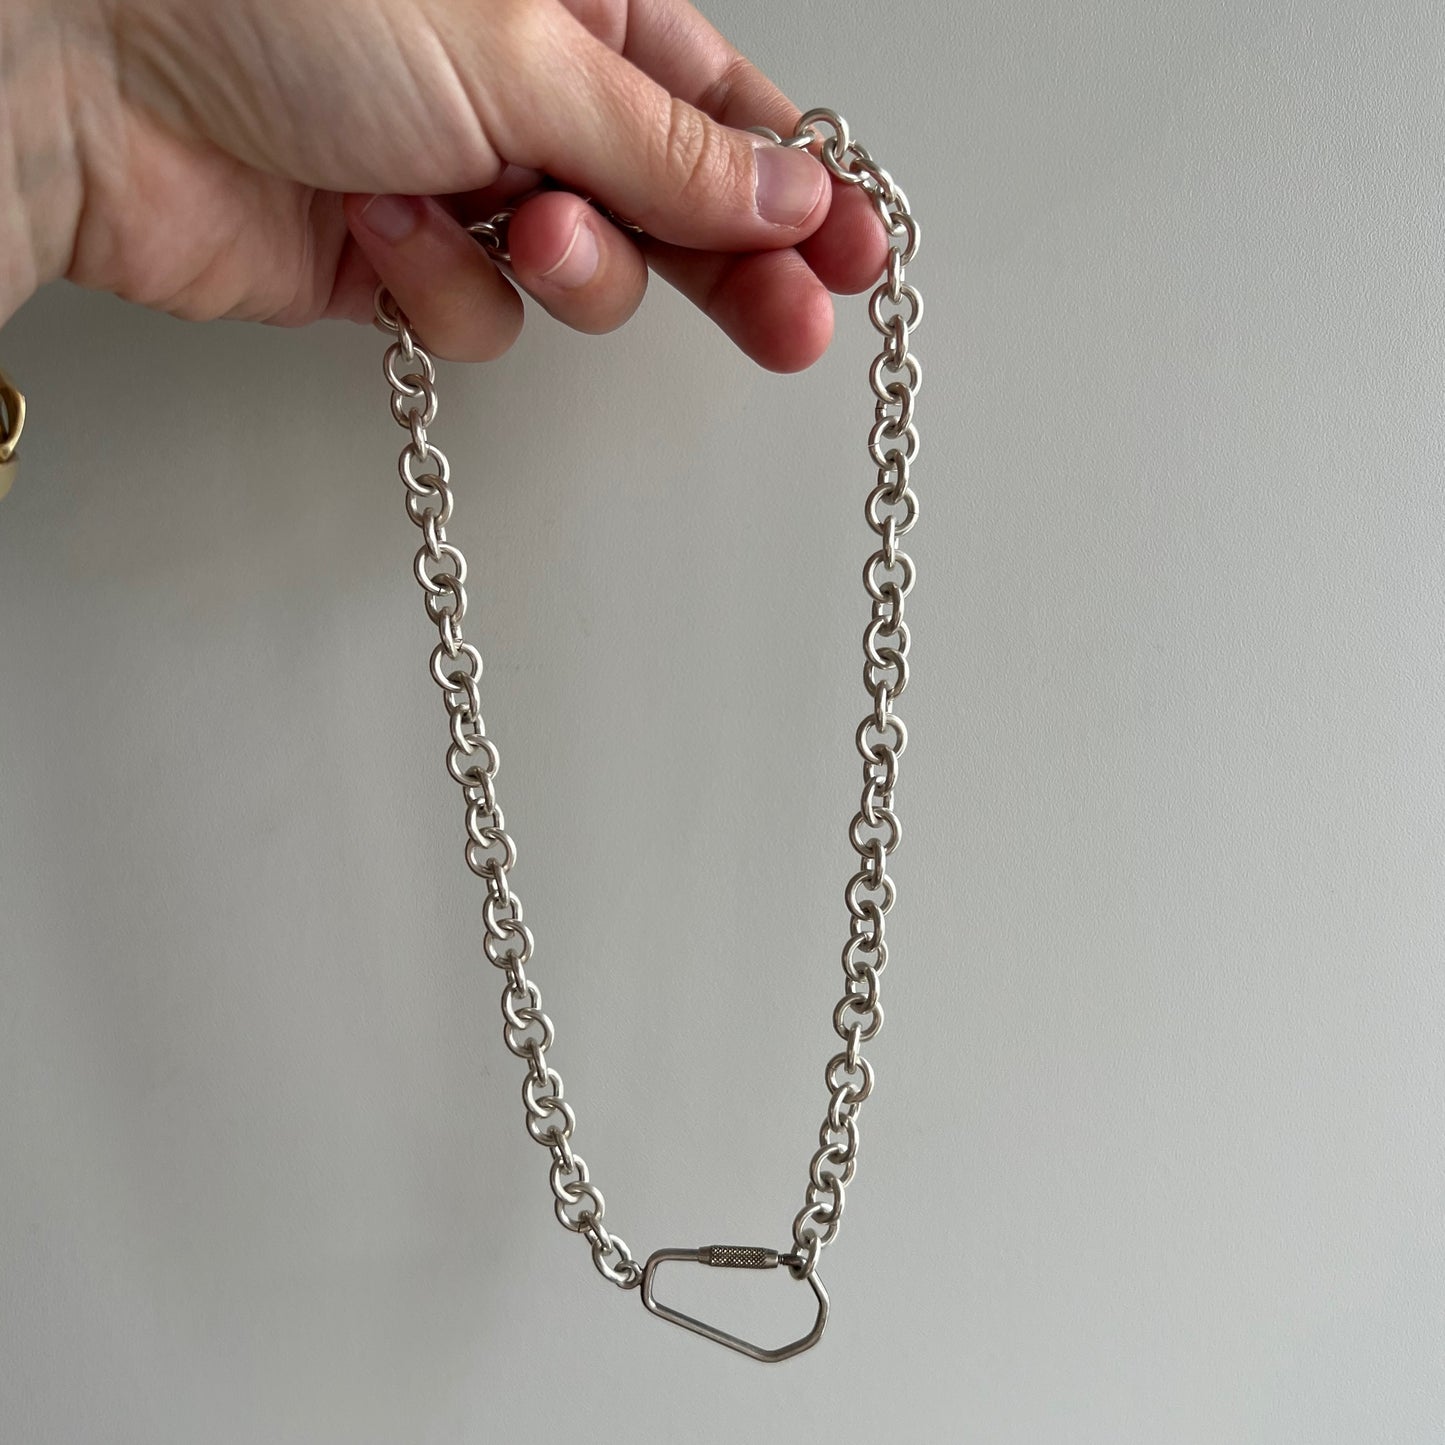 reimagined V I N T A G E // coffin connector / sterling silver rolo chain with carabiner pendant holder / up to 17",